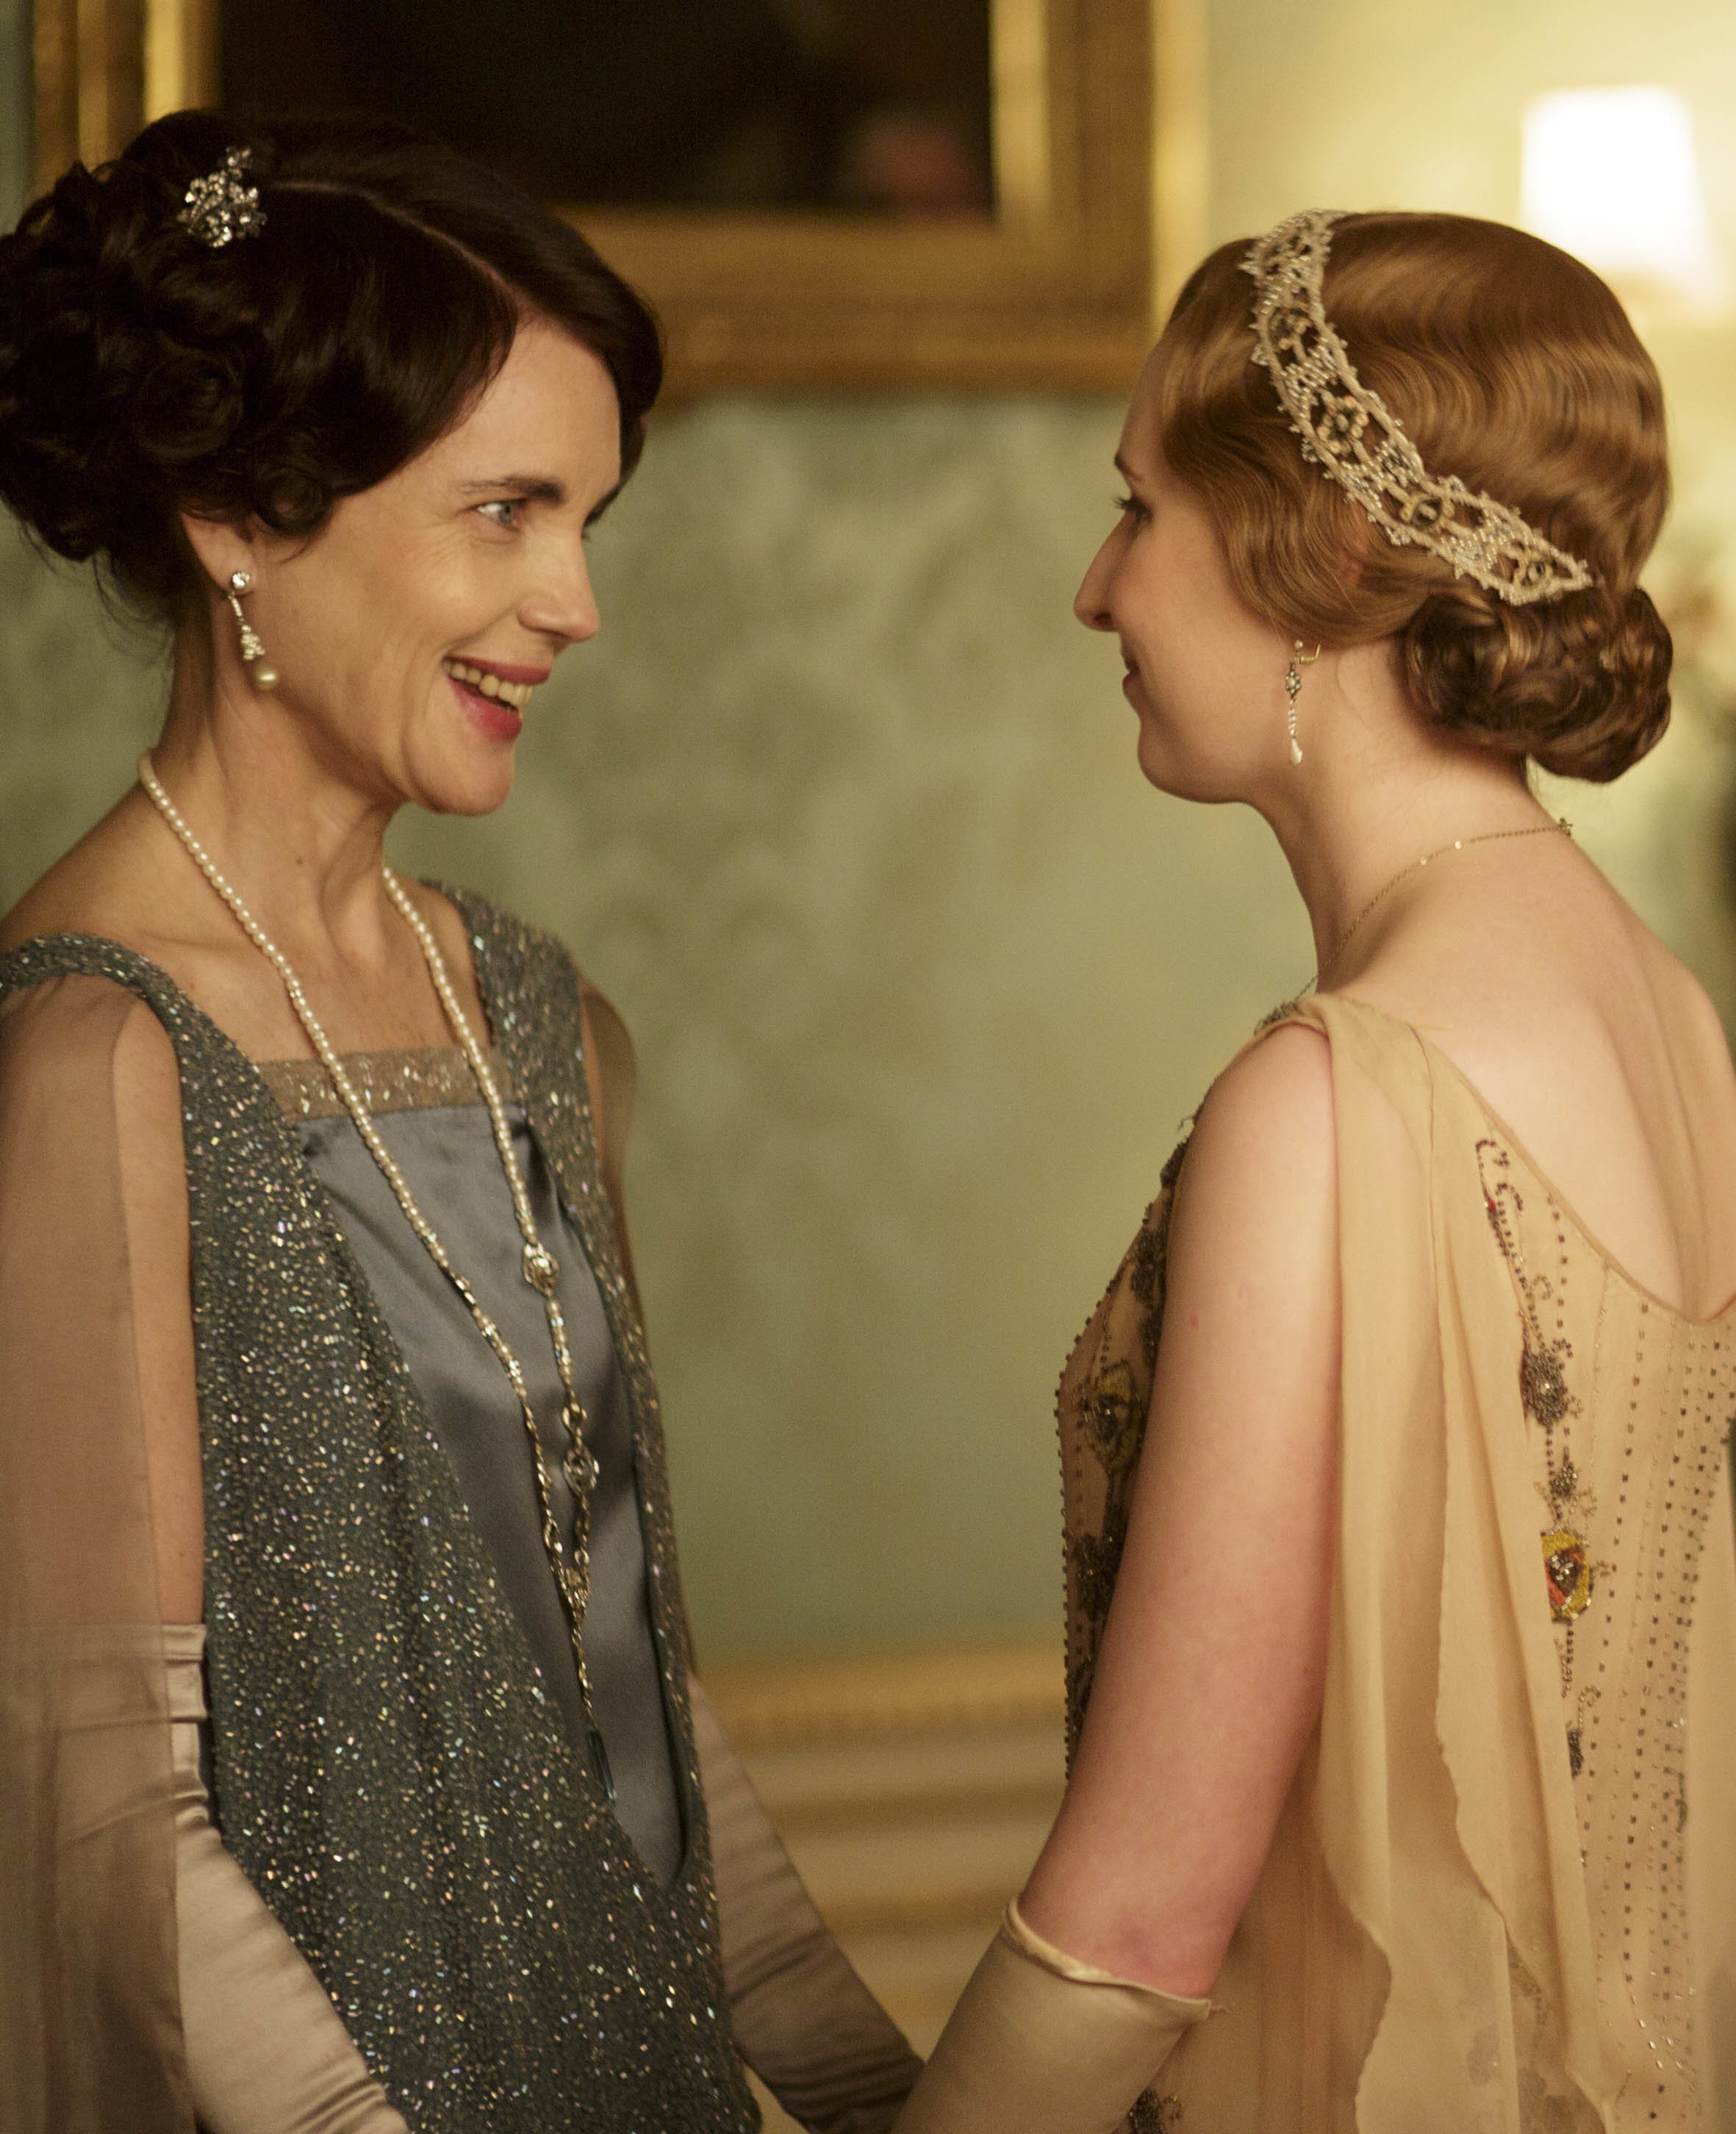 Downton's Sarah Bunting: I can't bear to watch myself